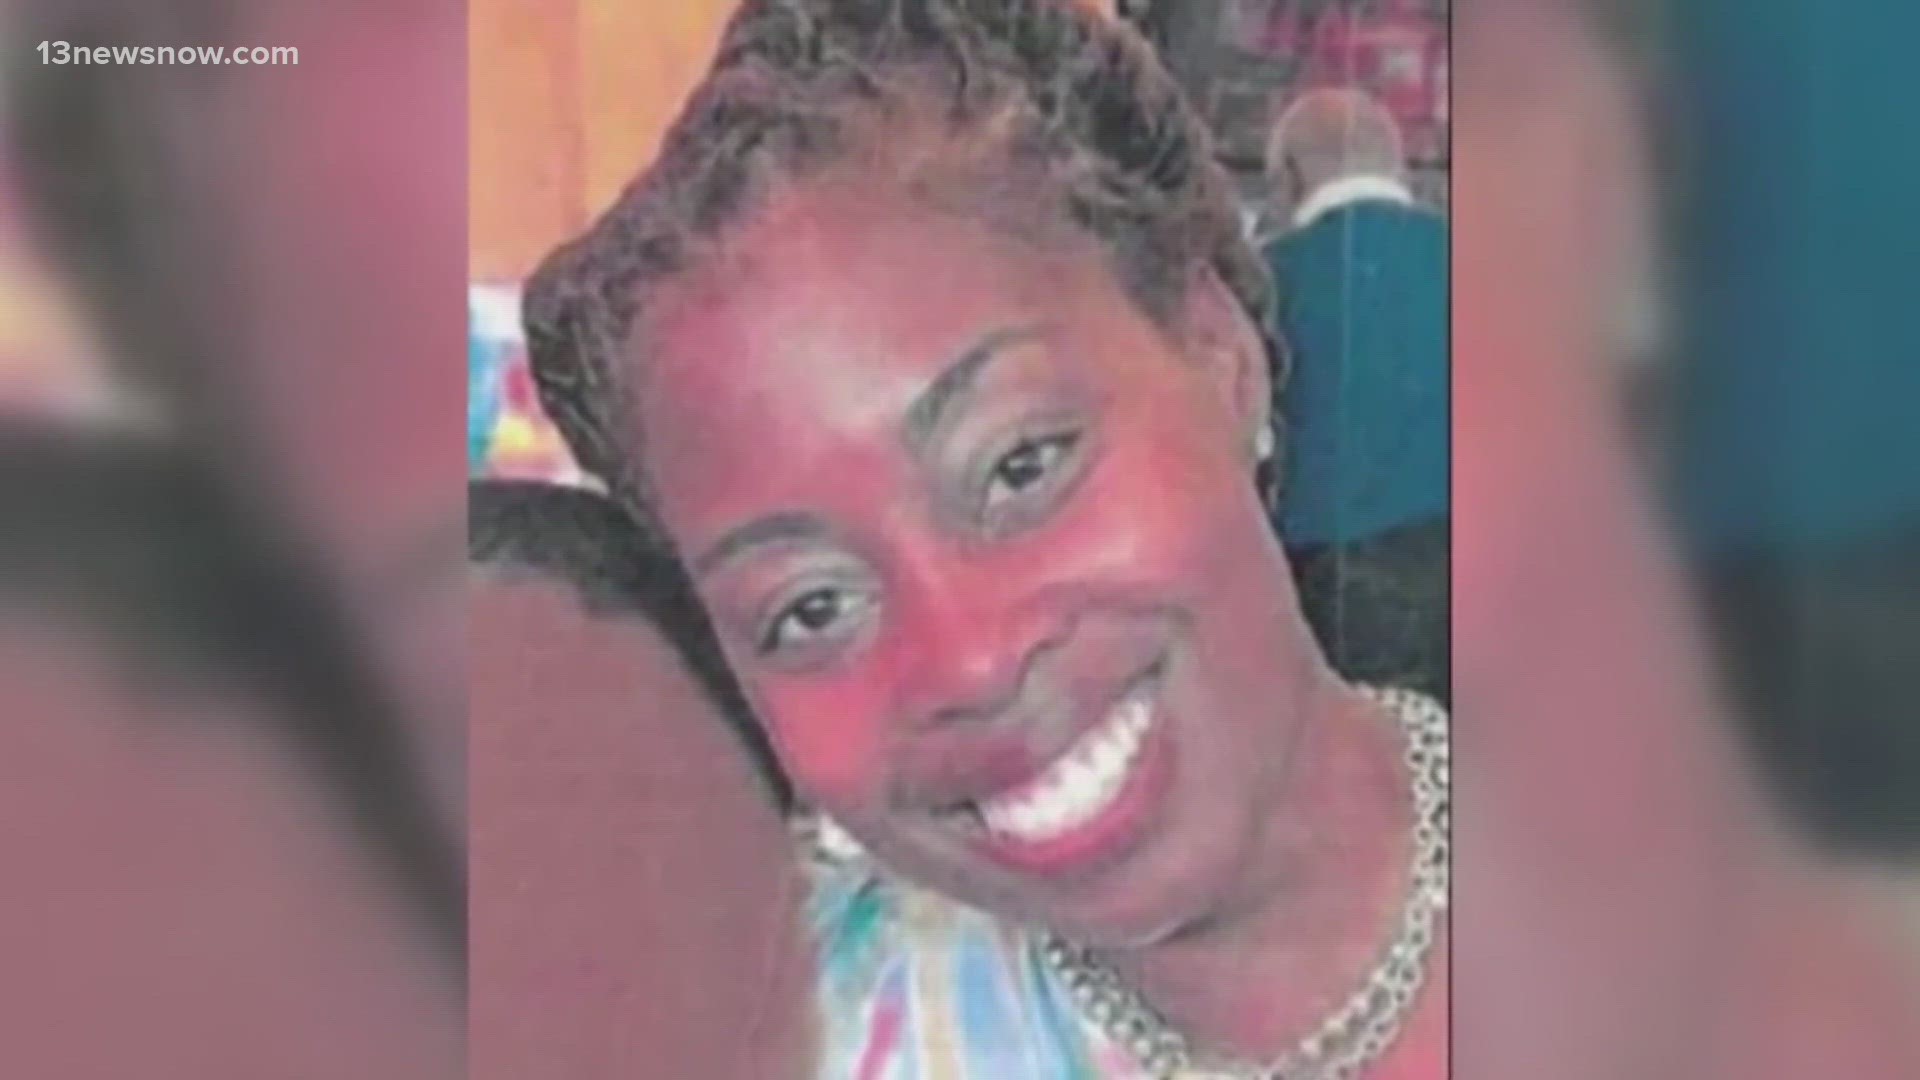 Shanita Eure-Lewis disappeared from Newport News more than a year ago.